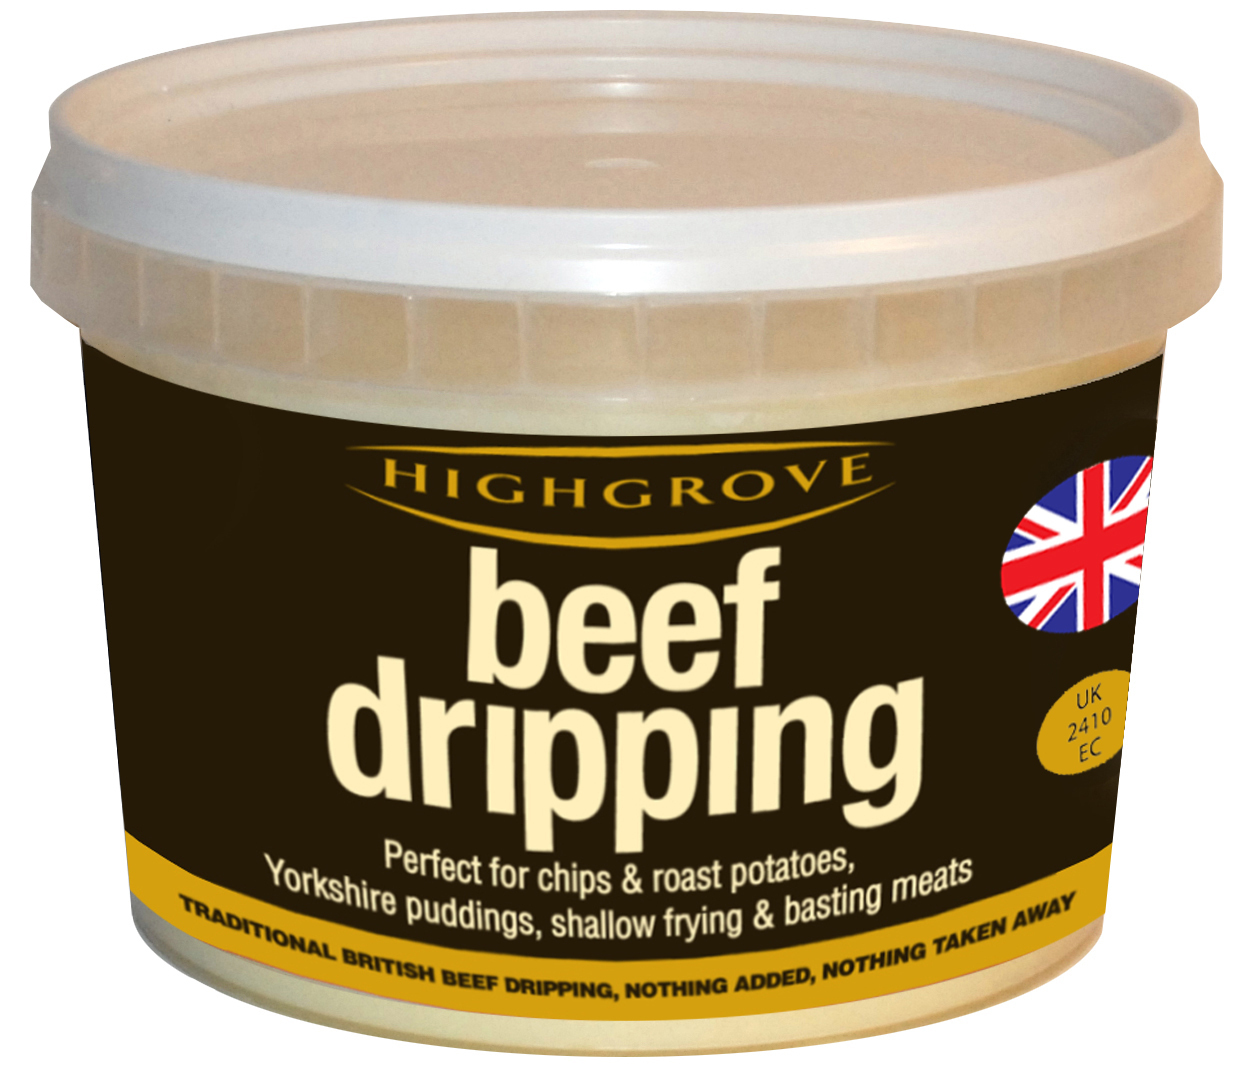 Beef dripping suppliers